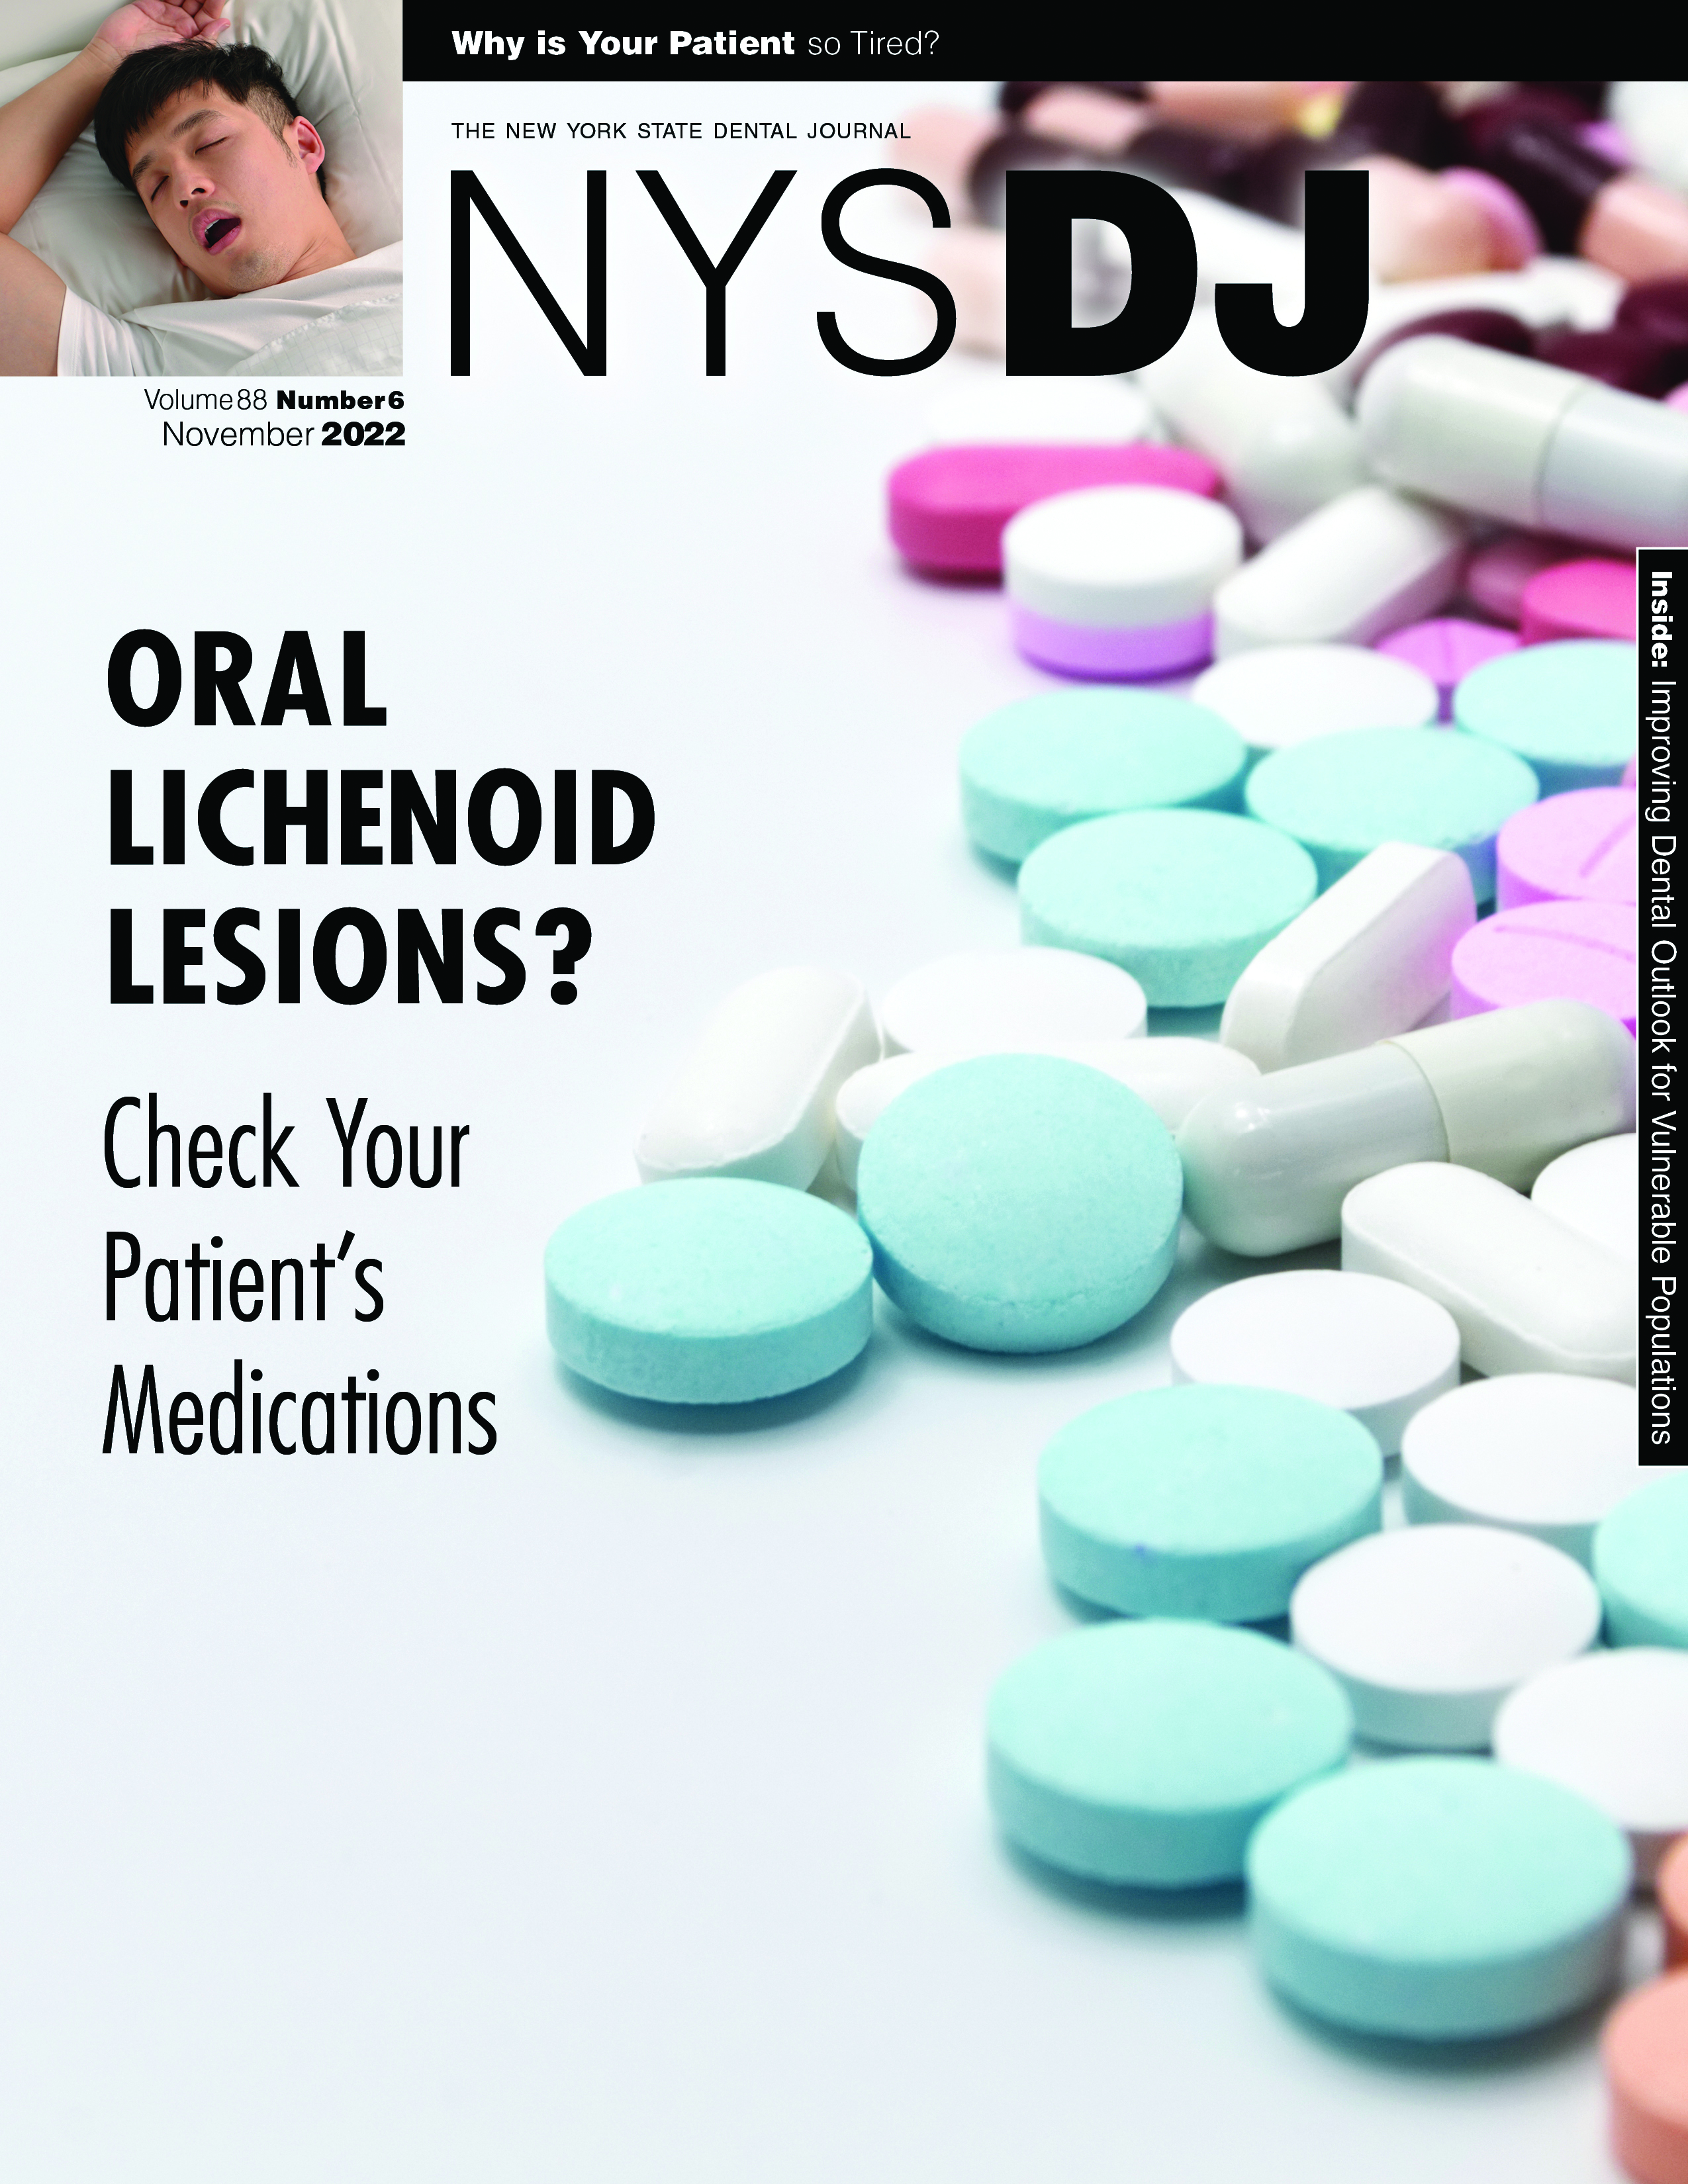 Cover of the NYSDJ with a variety of pills spread out on a table. In the corner there is a square cutout of a sleeping person.